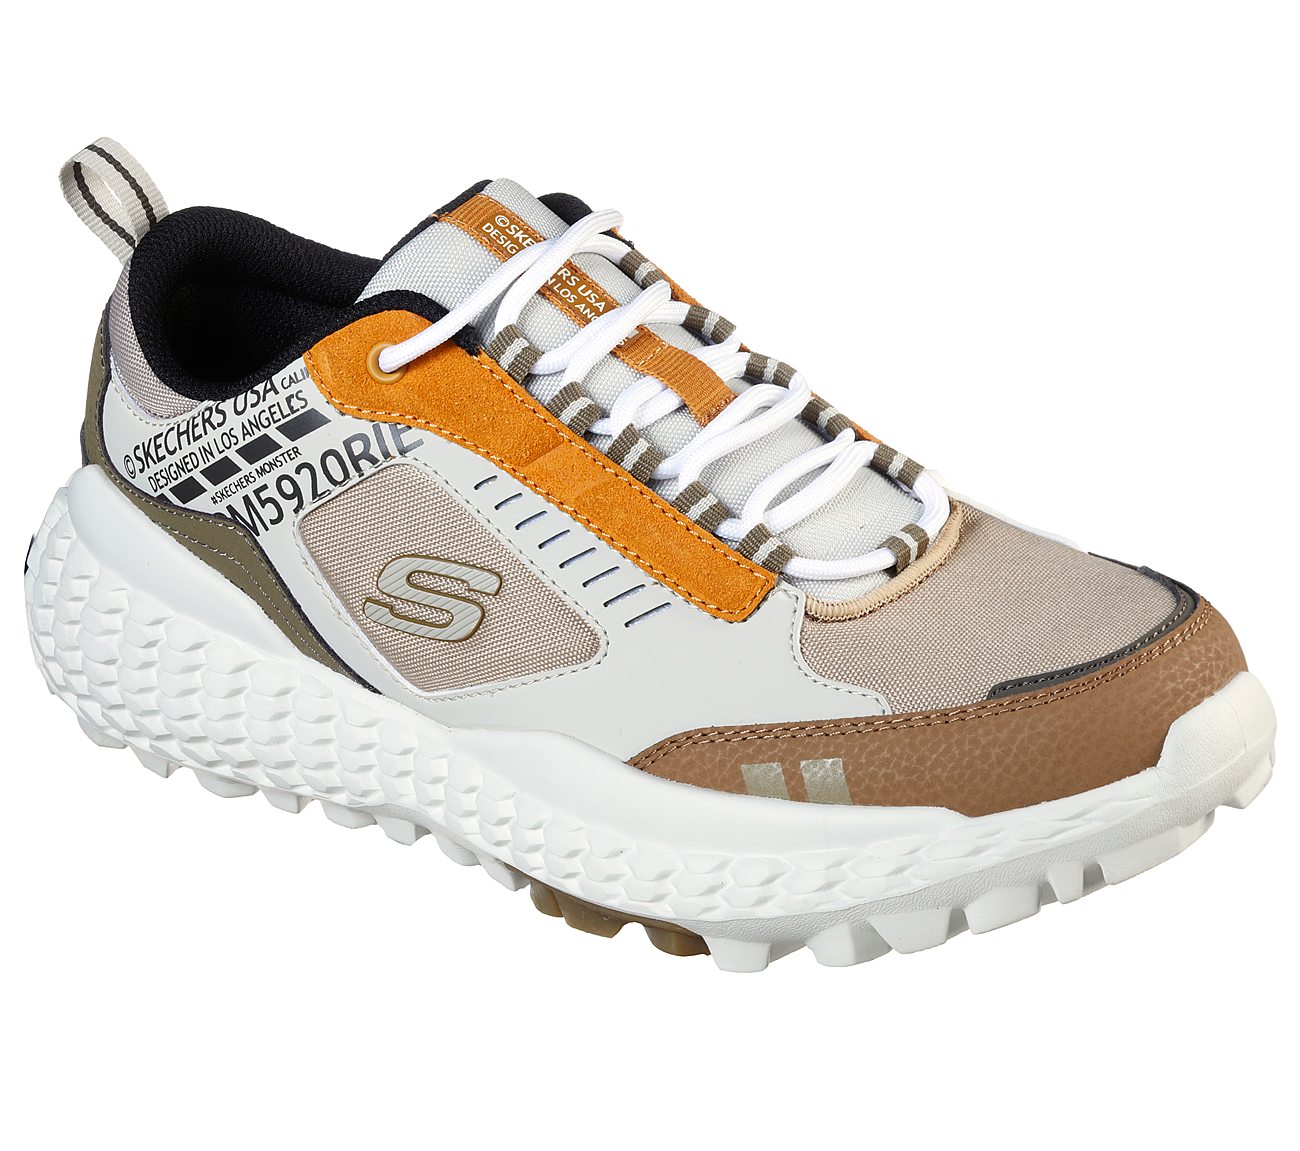 SKECHERS MONSTER, TAUPE/NATURAL Footwear Right View